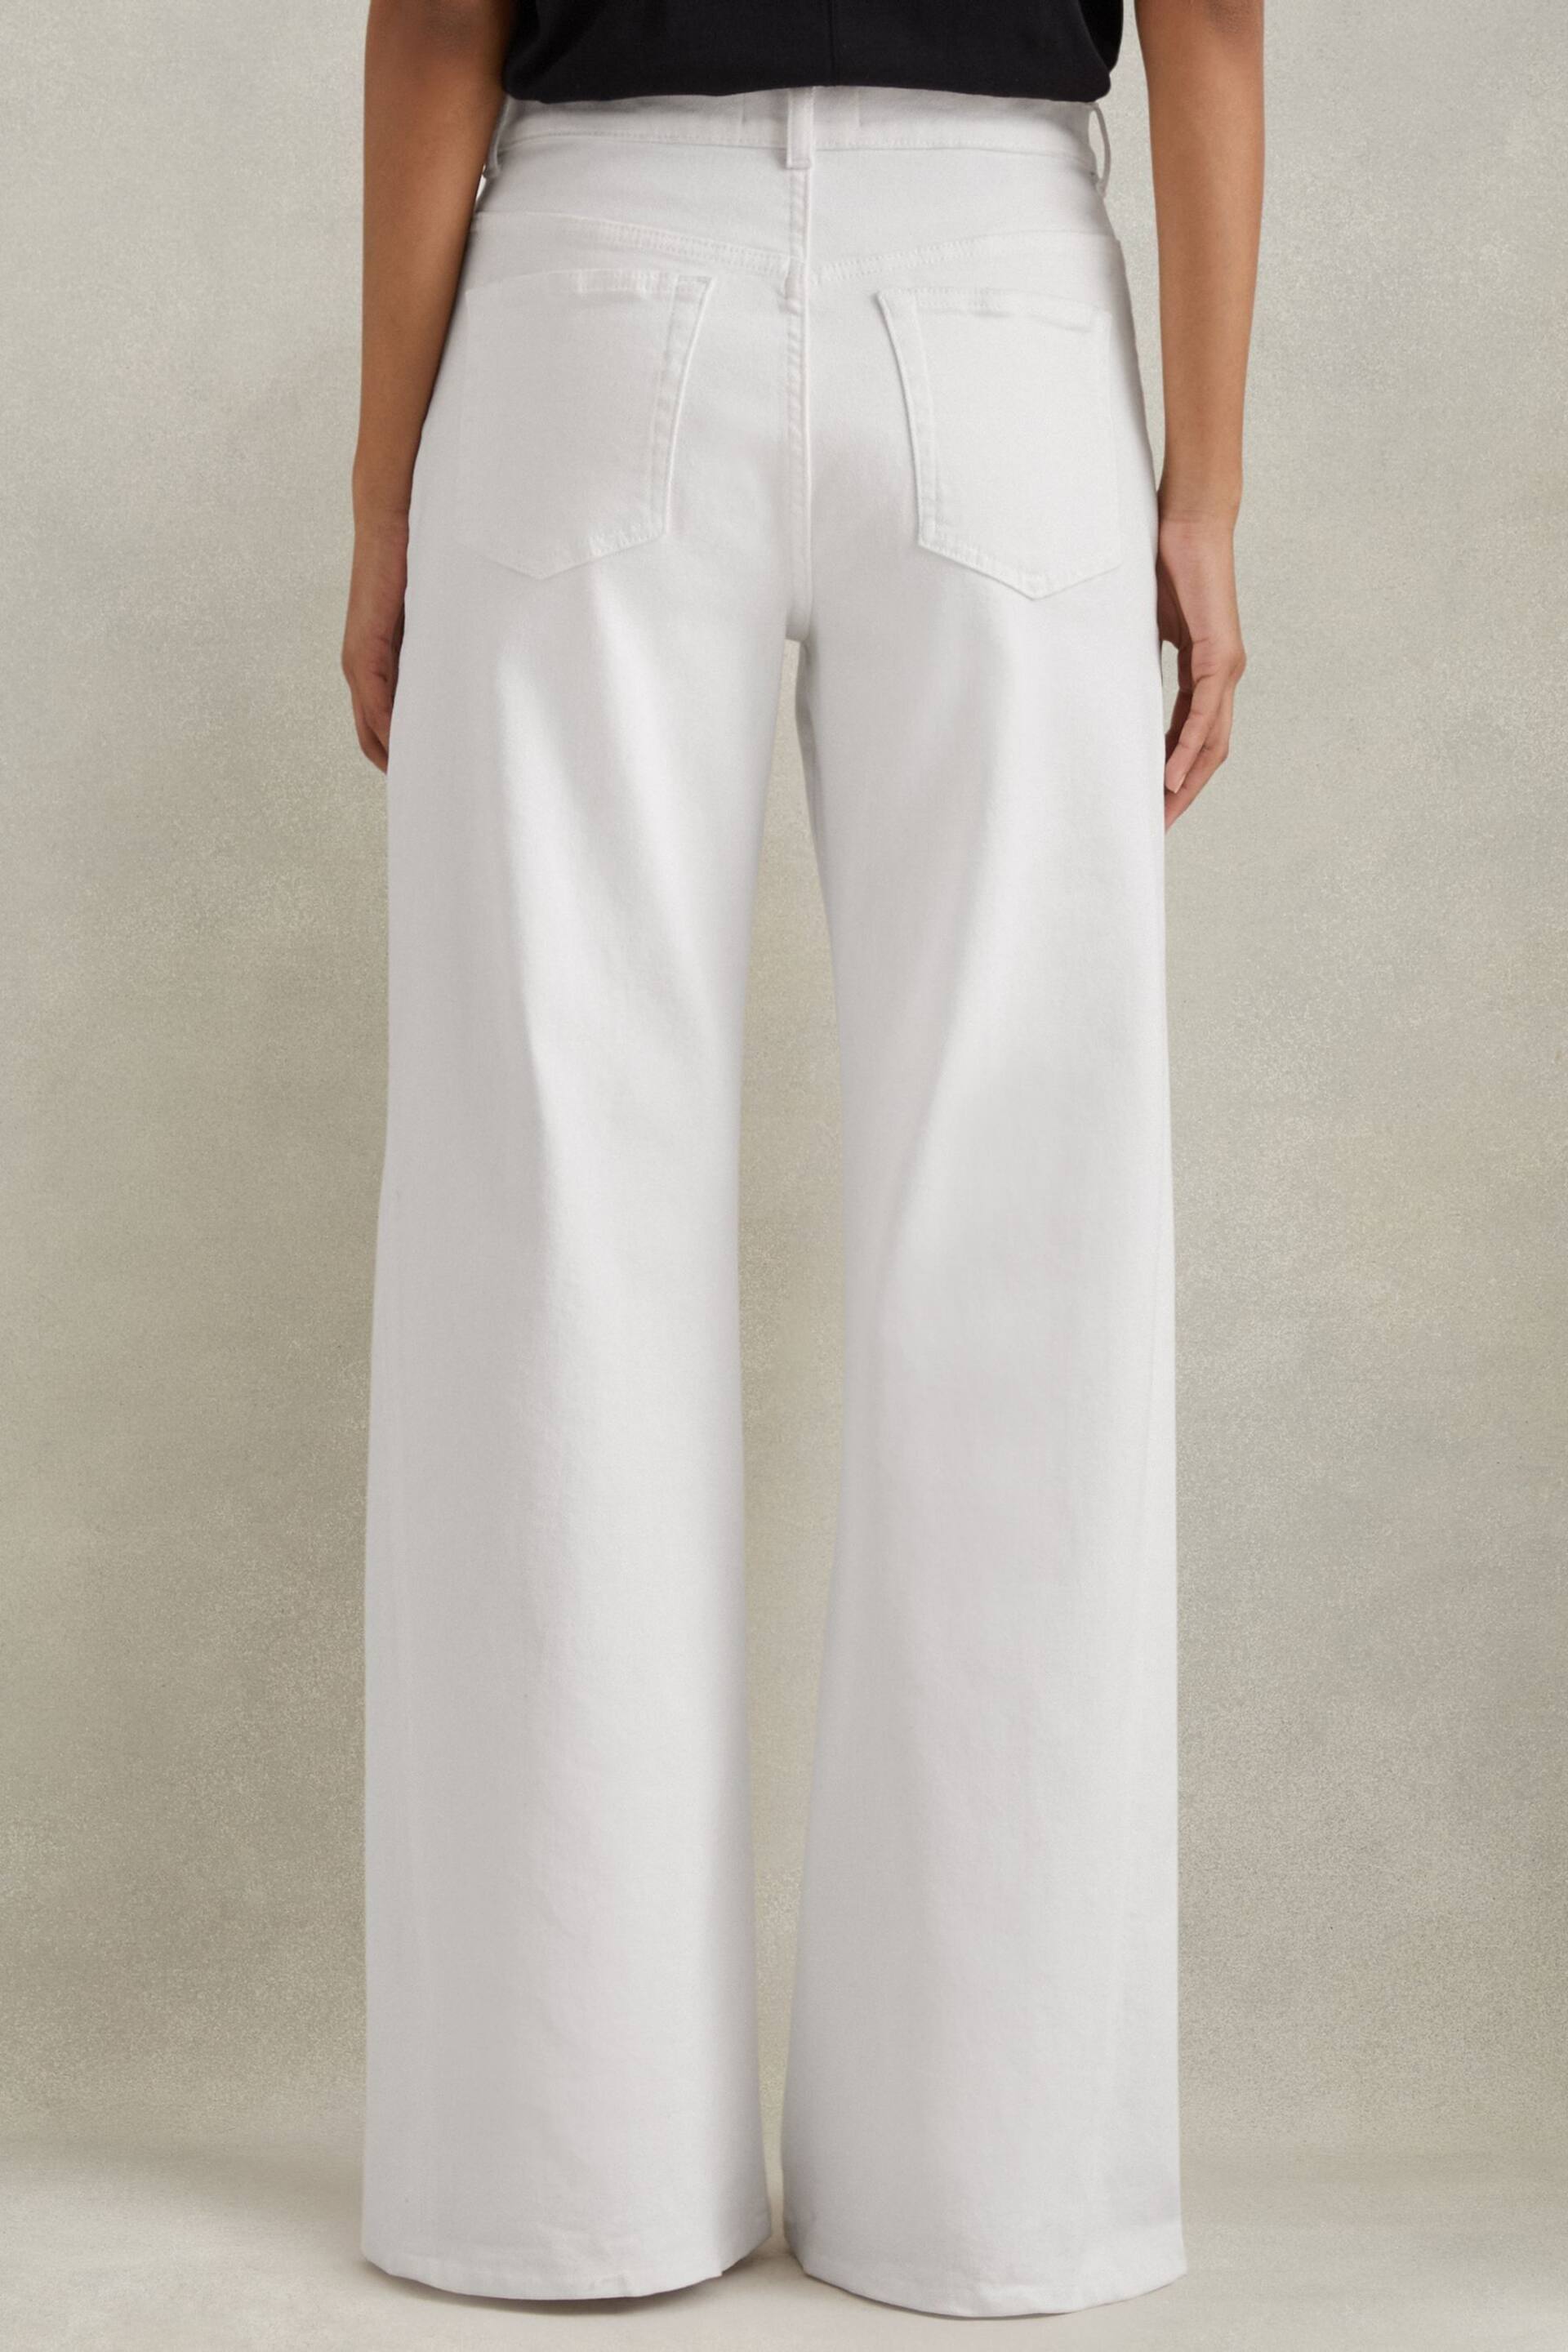 Reiss White Maize Flared Side Seam Jeans - Image 5 of 5